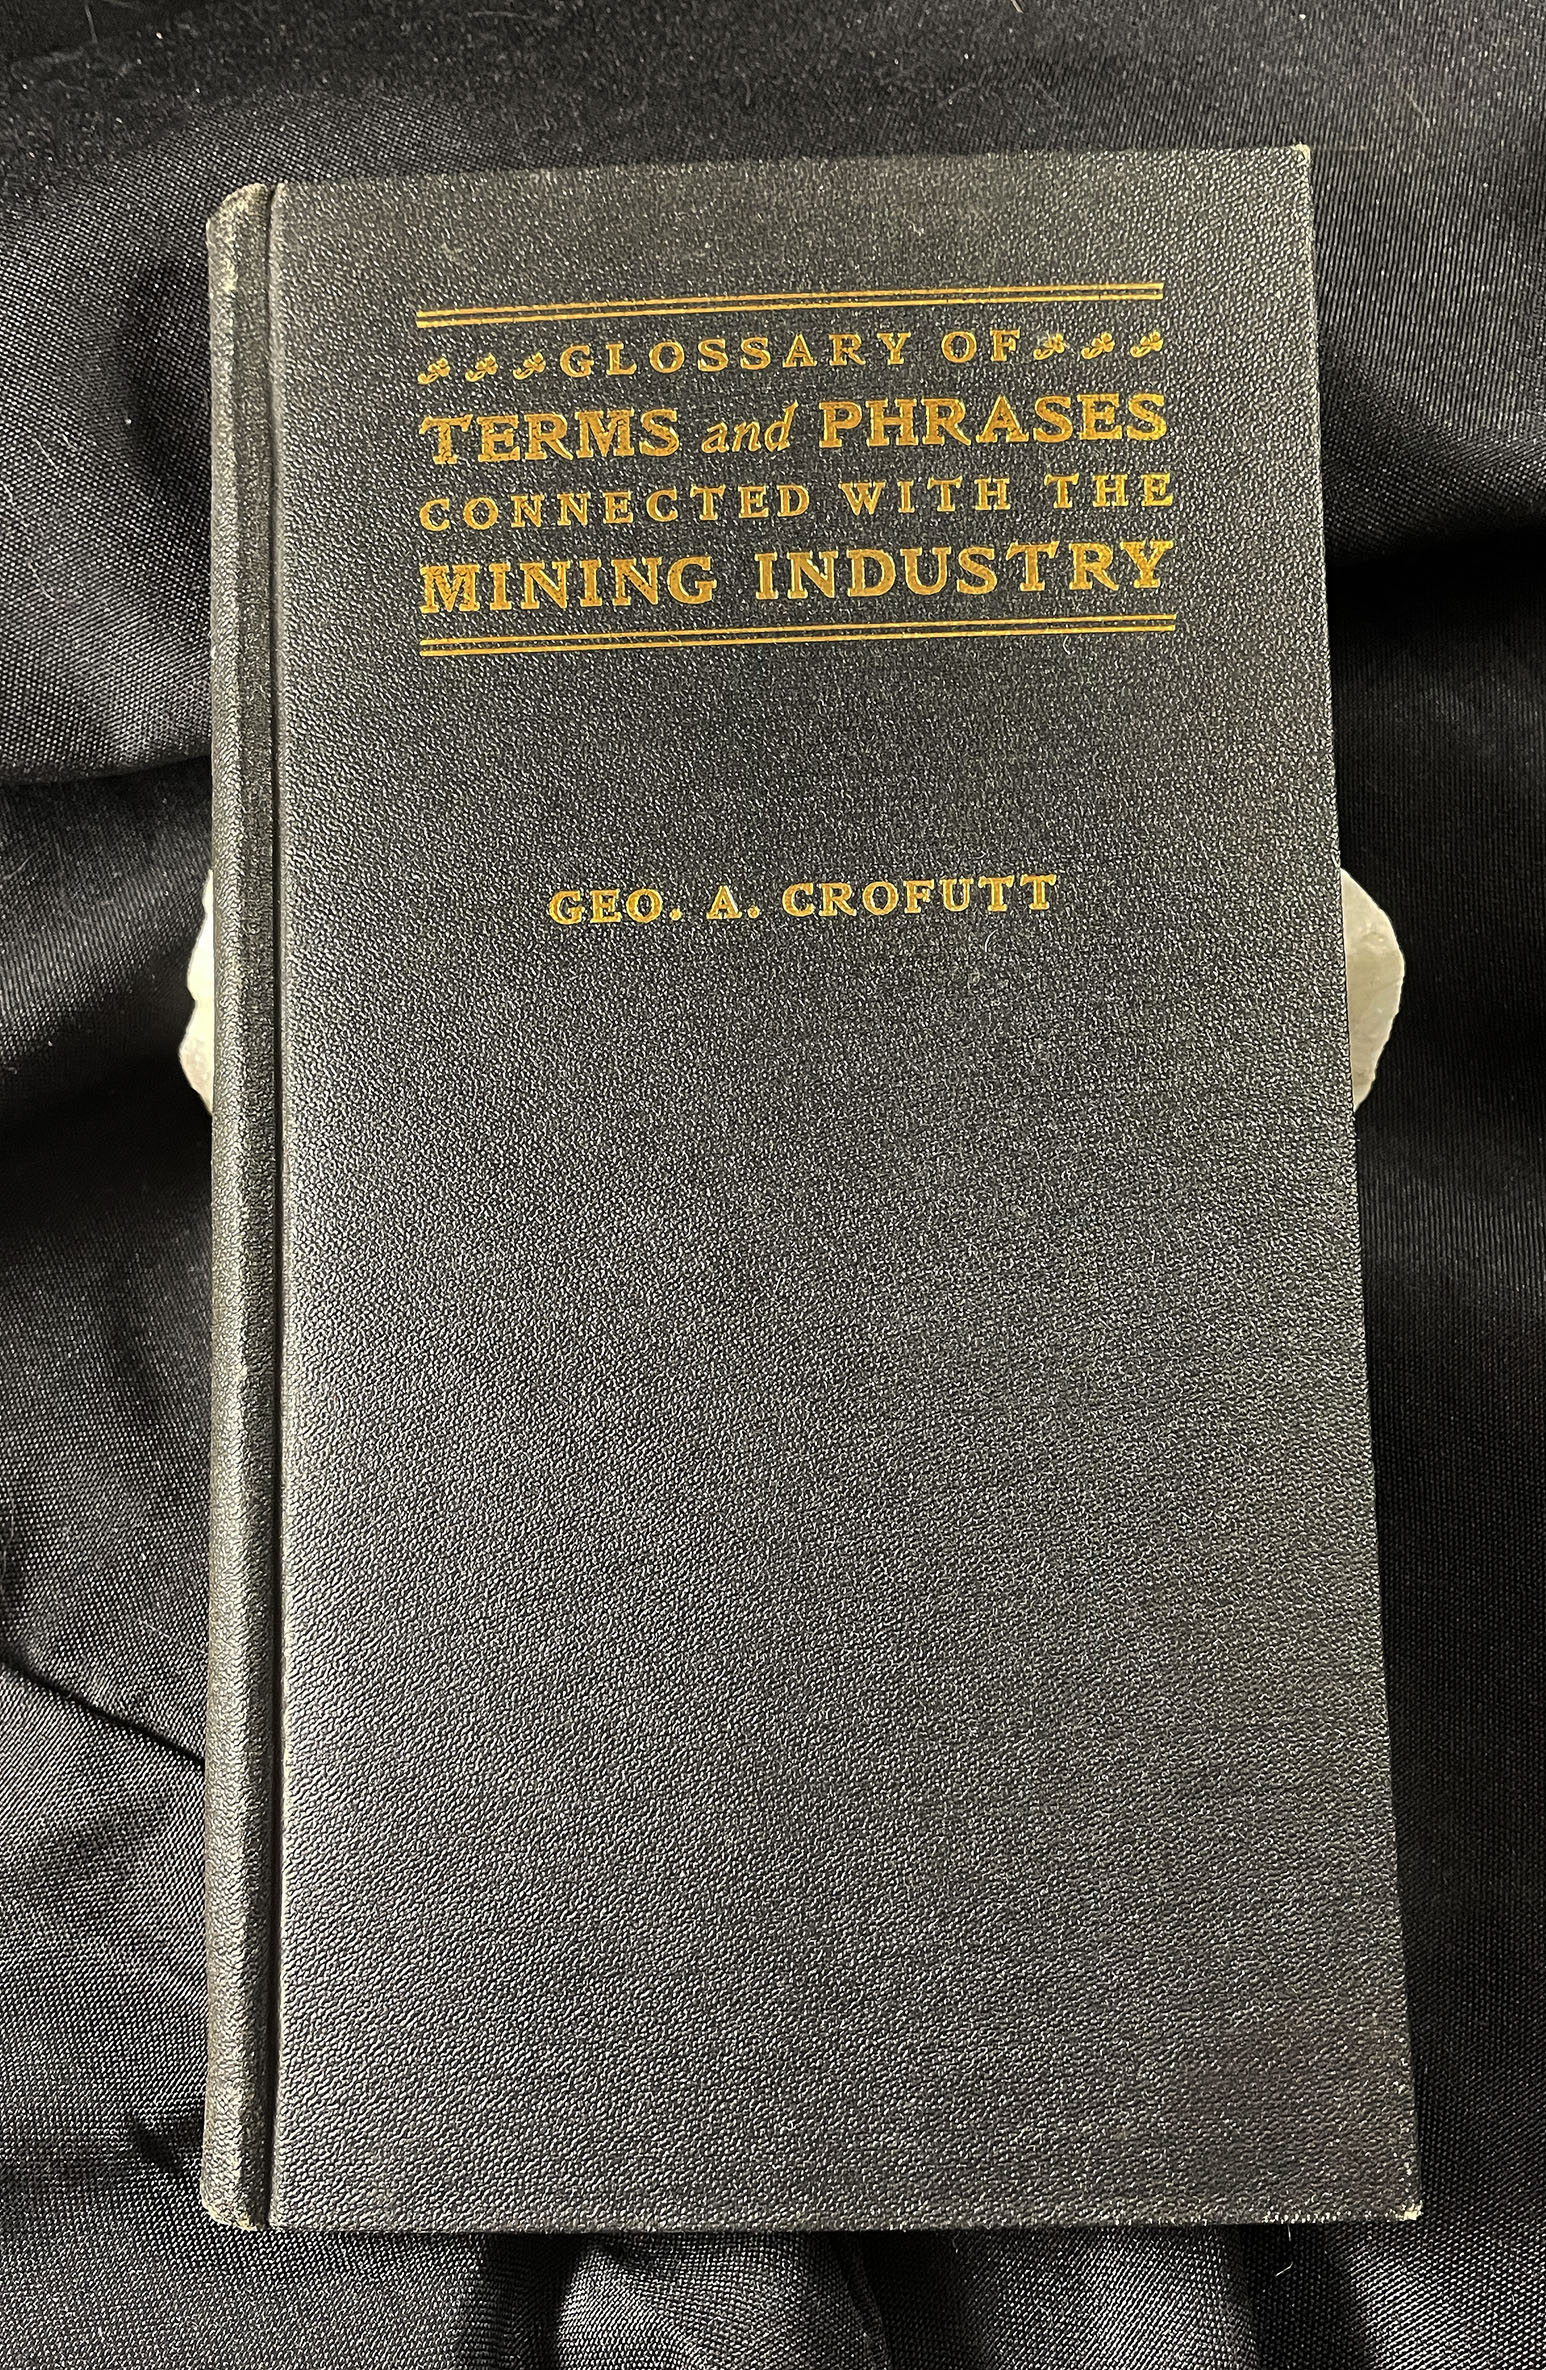 Glossary of Terms & Phrases Mining Industry George A. Crofutt first edition book 1902